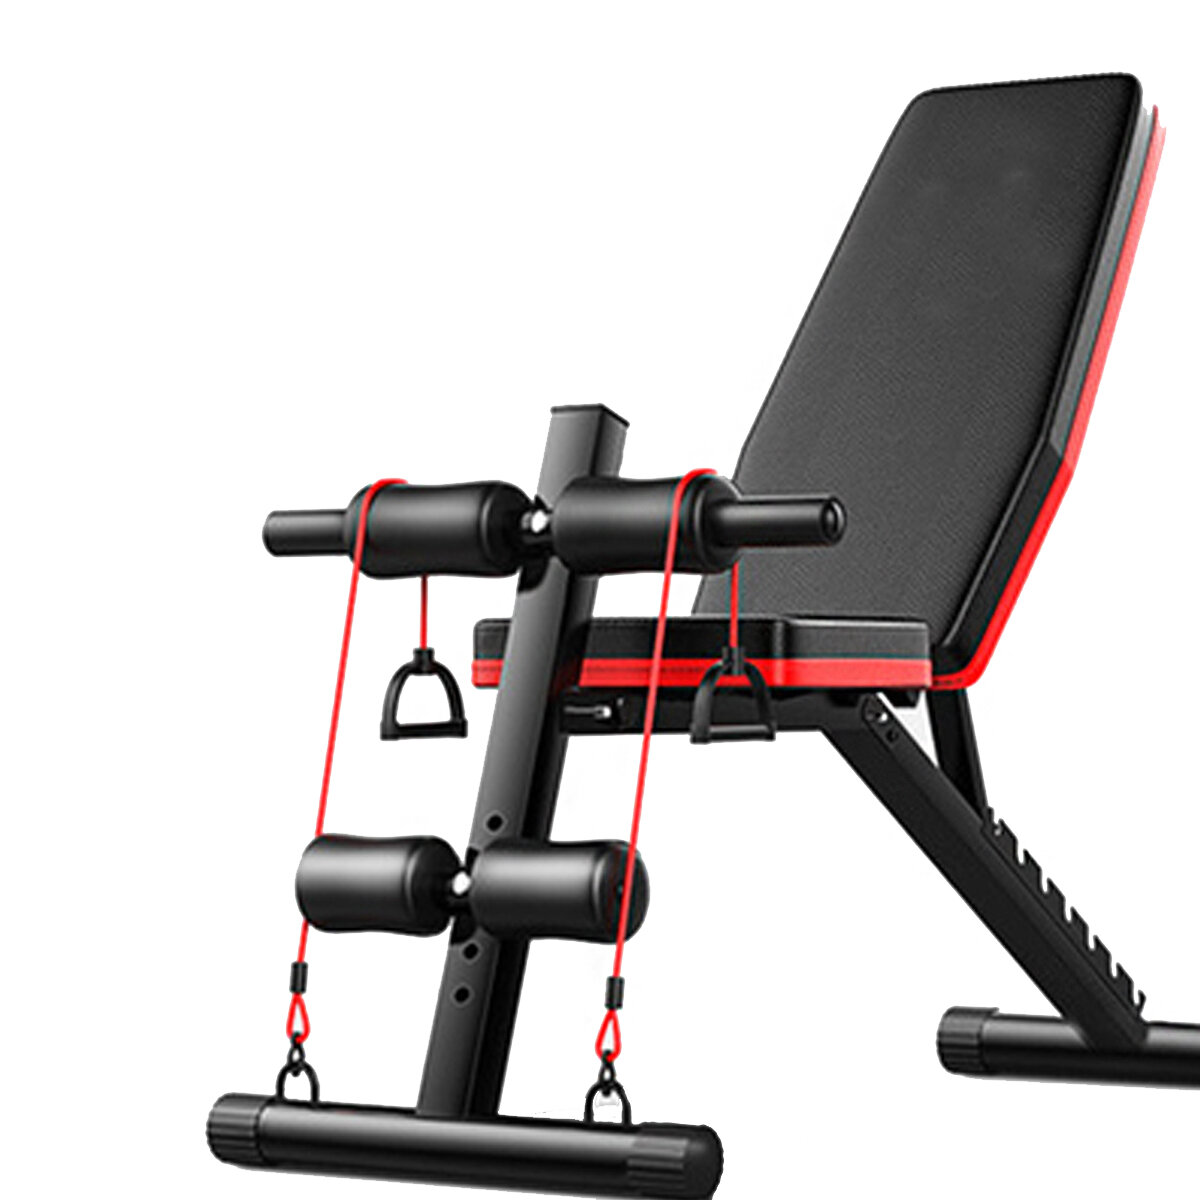 

5 in 1 Folding Home Dumbbell Sit Up Stool Weight Bench Adjustable Ab Muscle Training Board Sport Fitness Exercise Tools